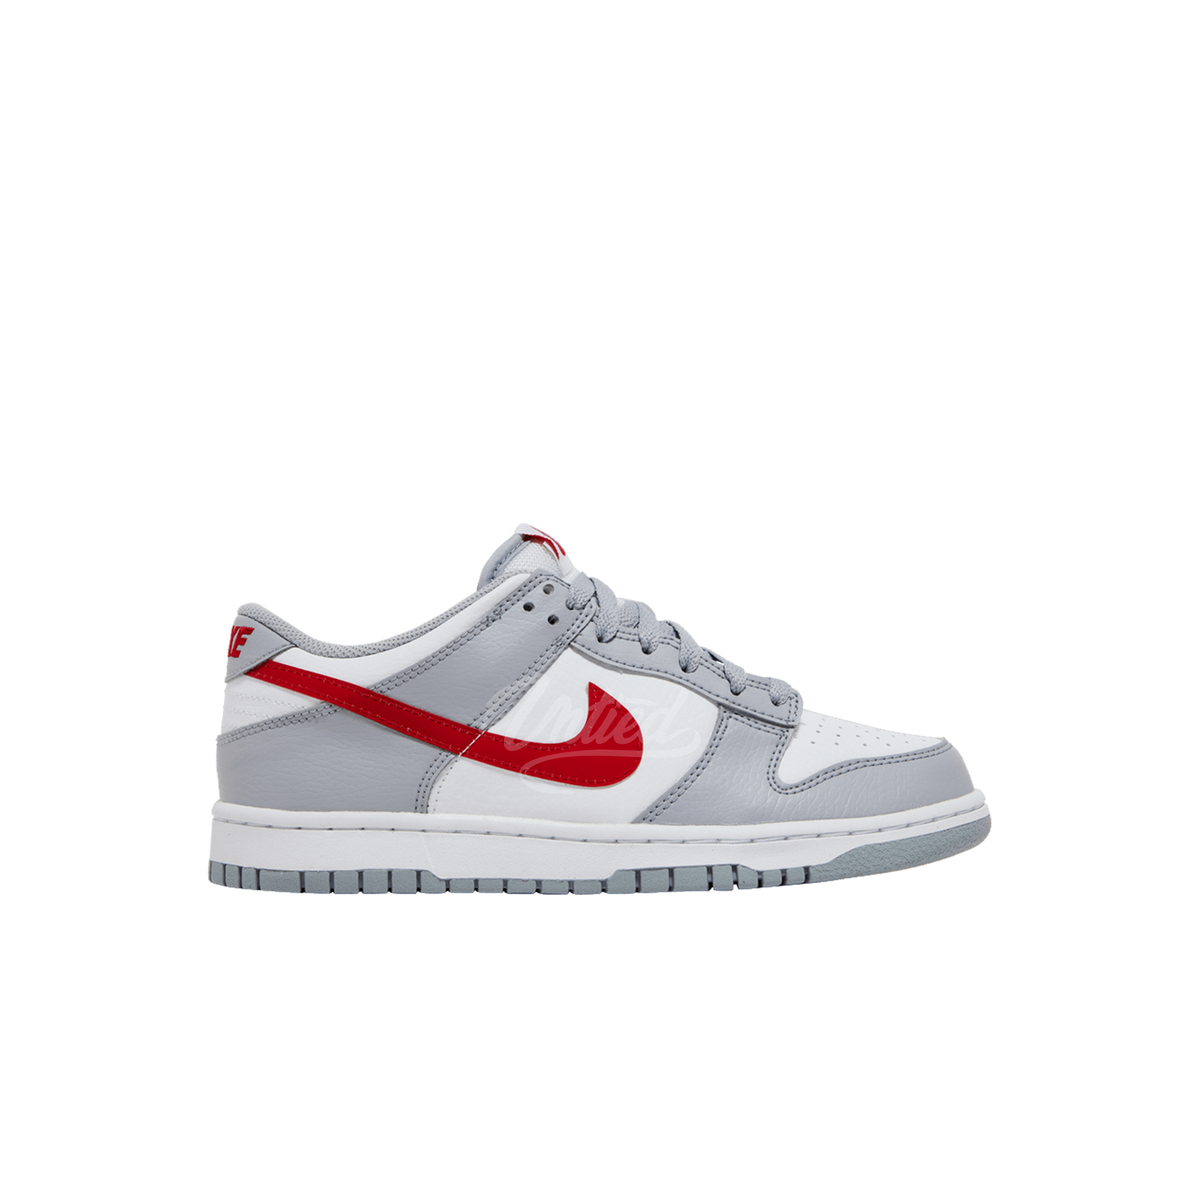 Nike Dunk Low "White Wolf Grey/University Red" (GS)